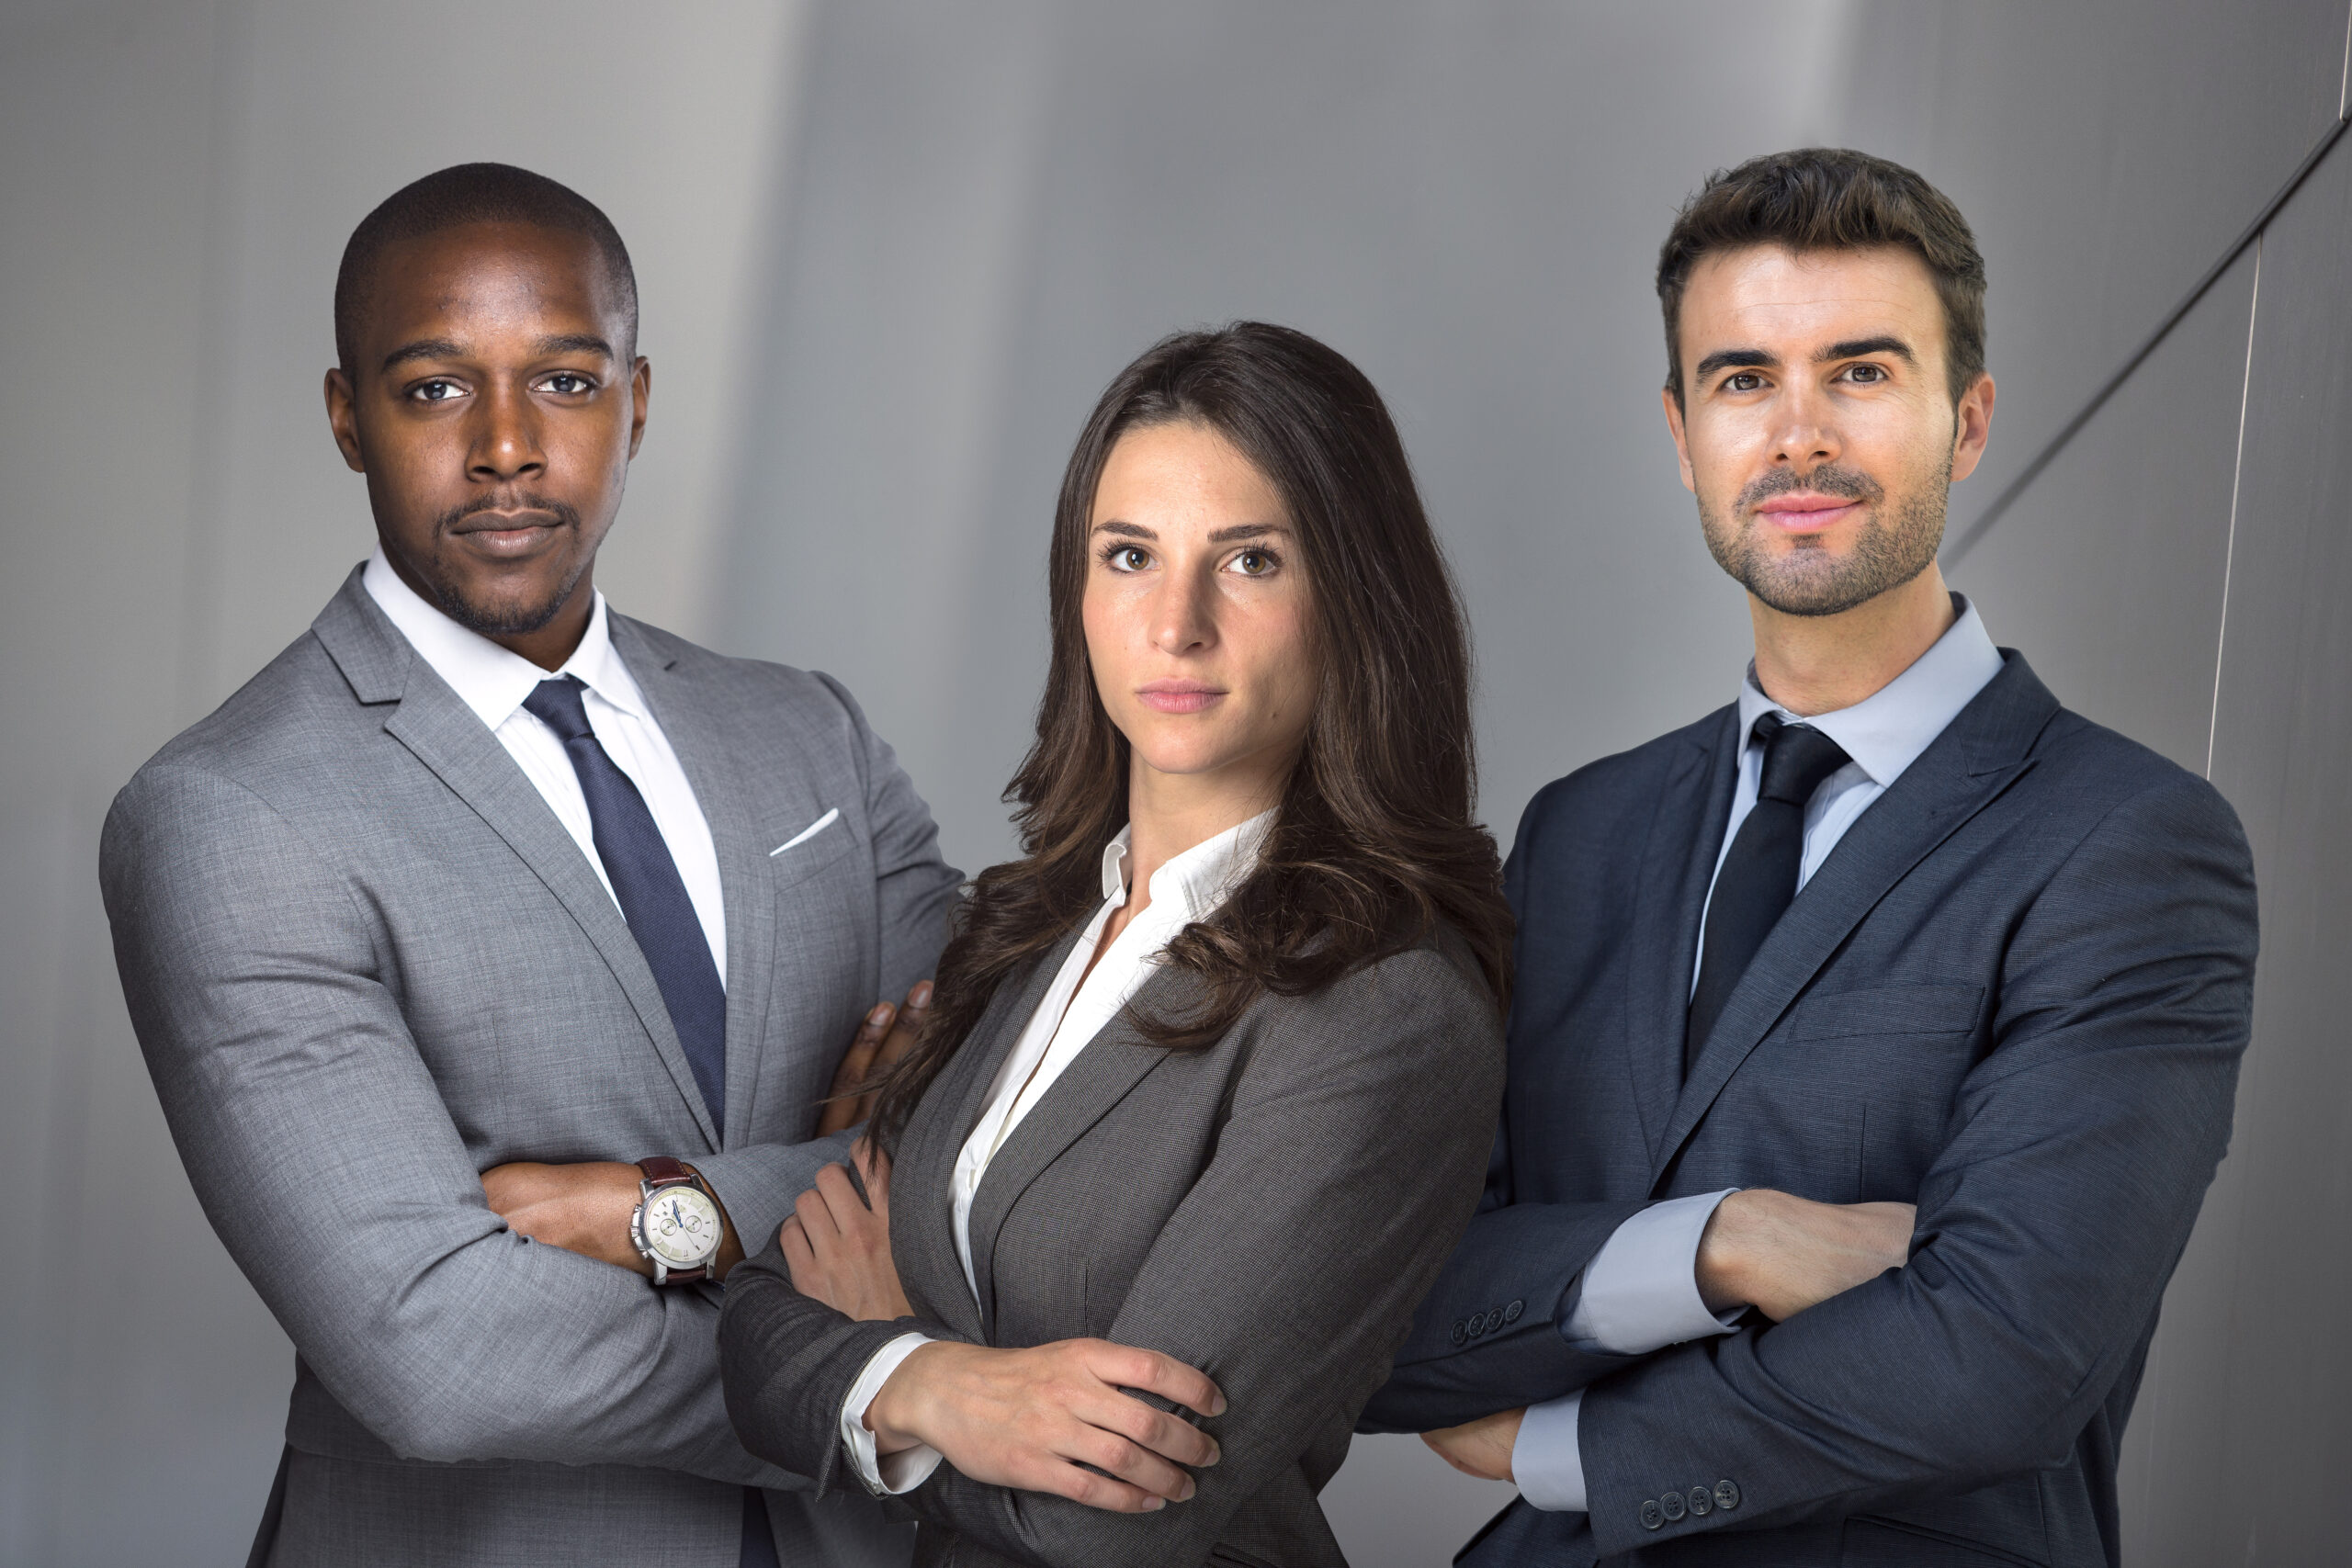 Strong serious group of lawyers team portrait pose, confident, determined, successful, powerful